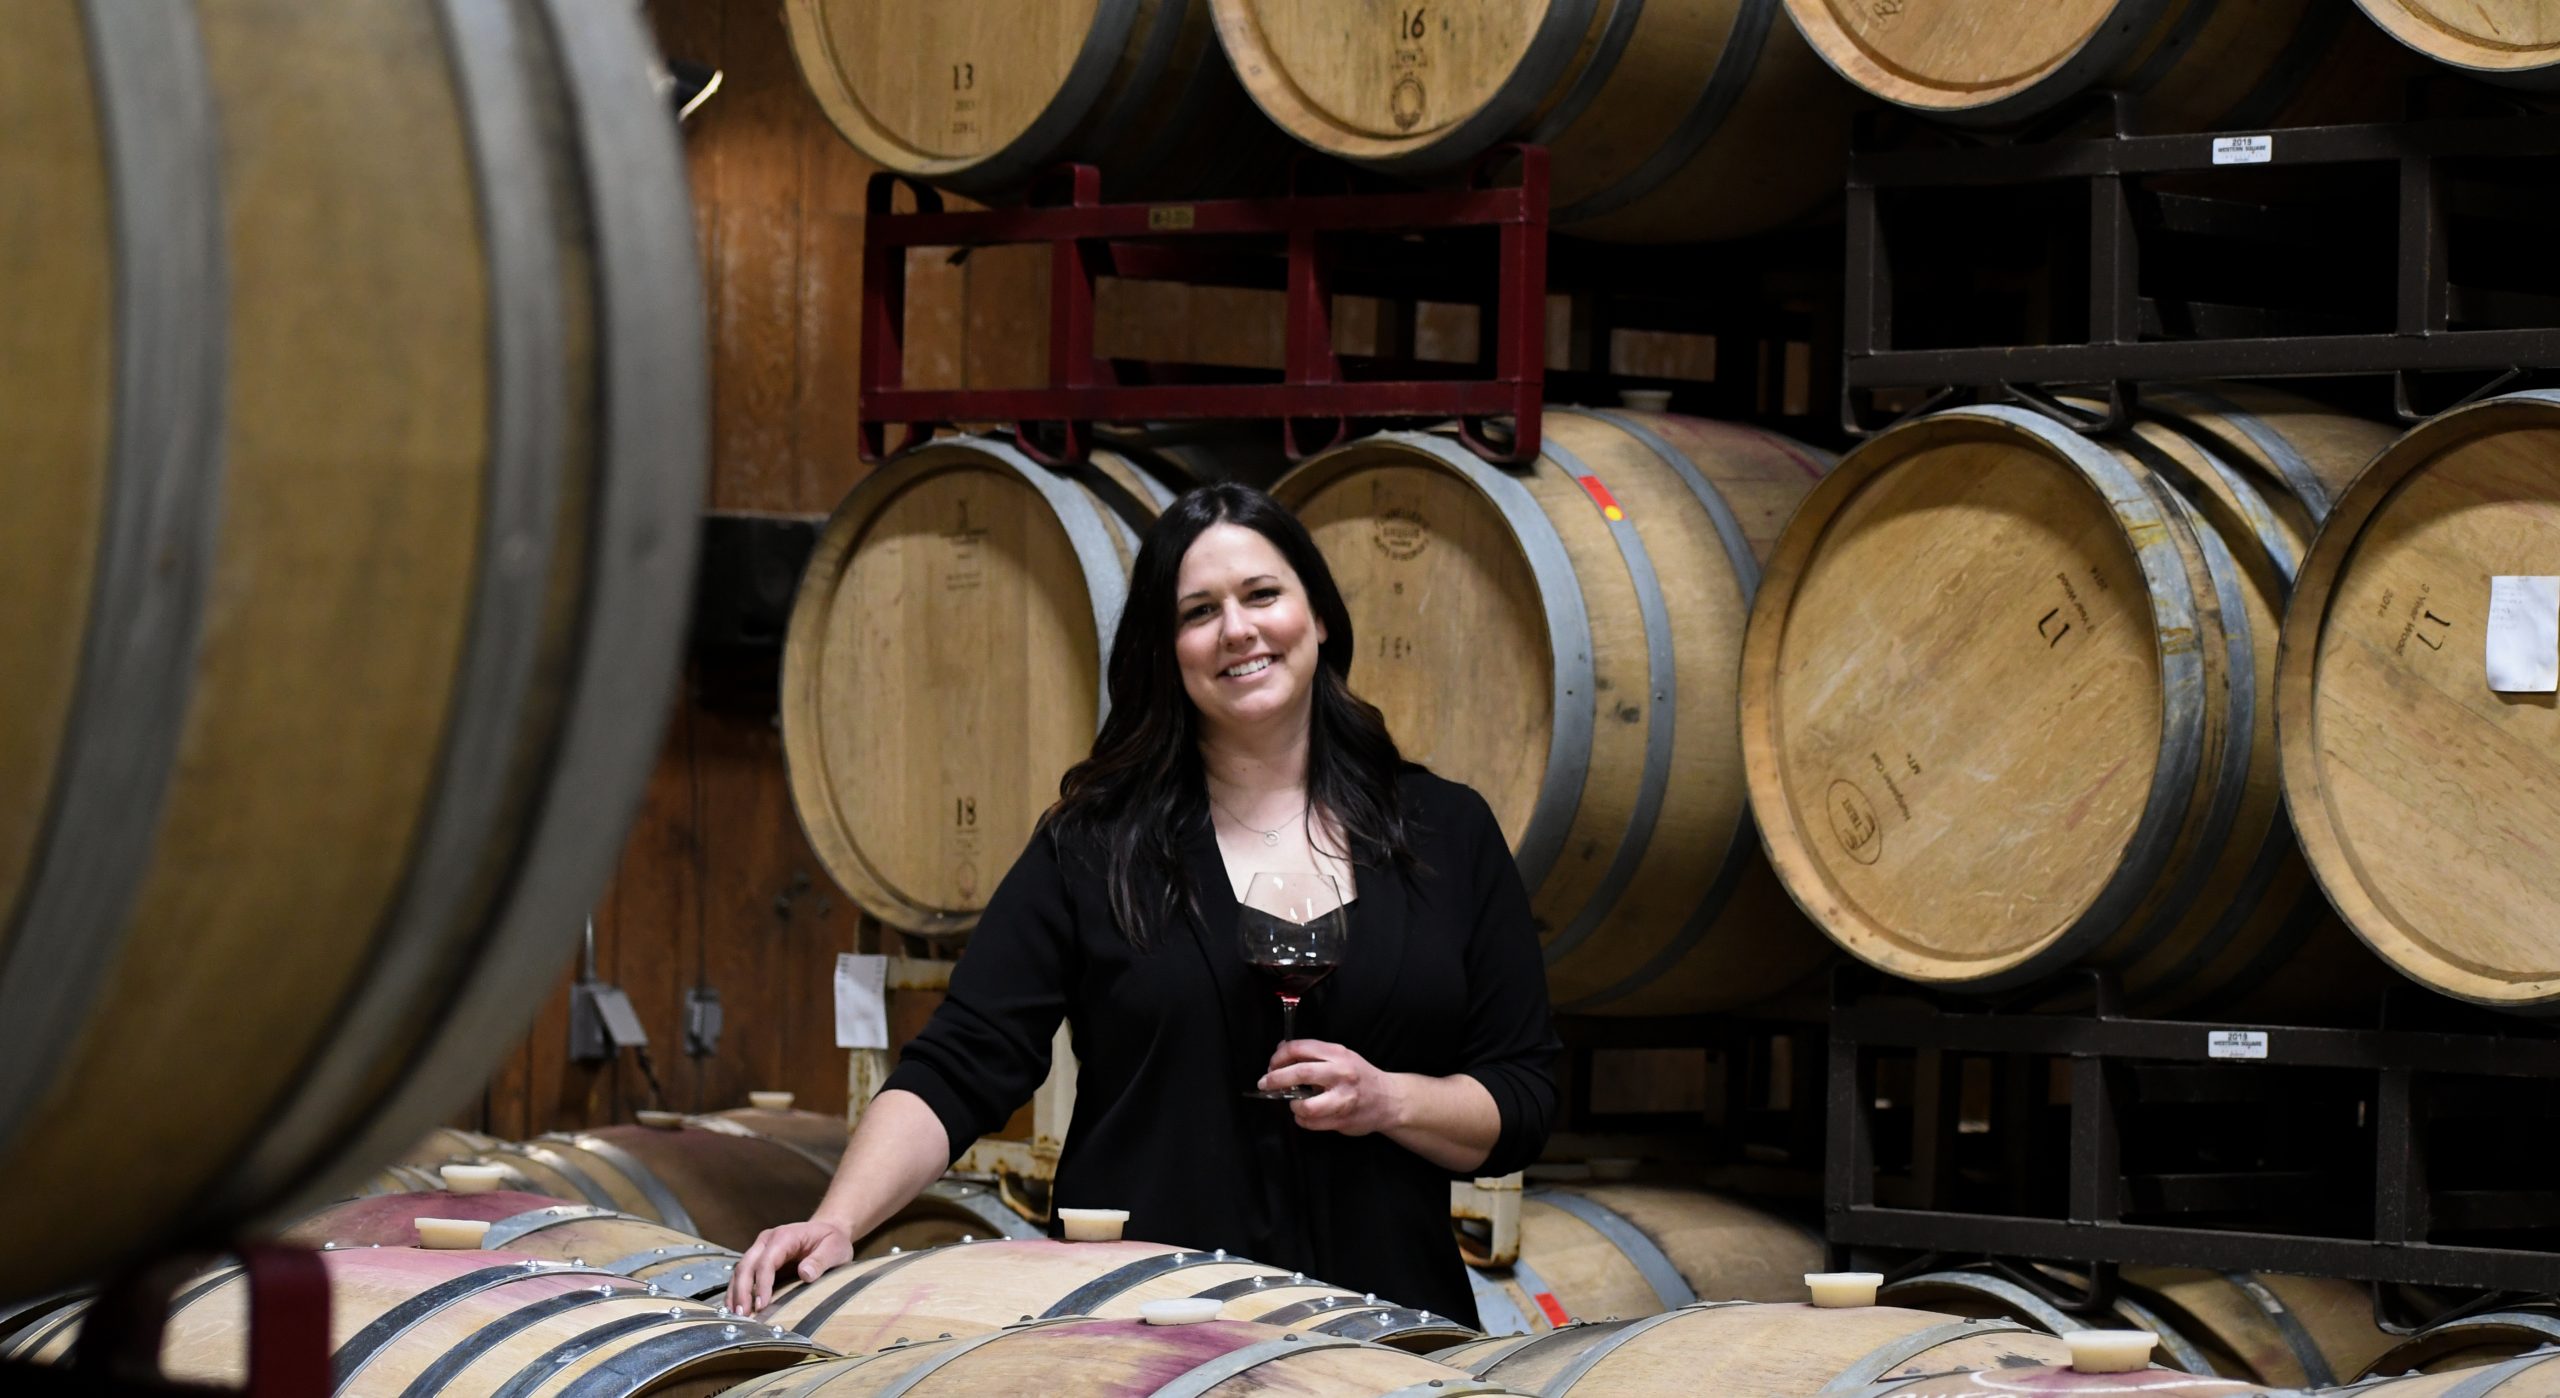 Winemaker Kristin Bryden holding a glass of wine in the barrel room